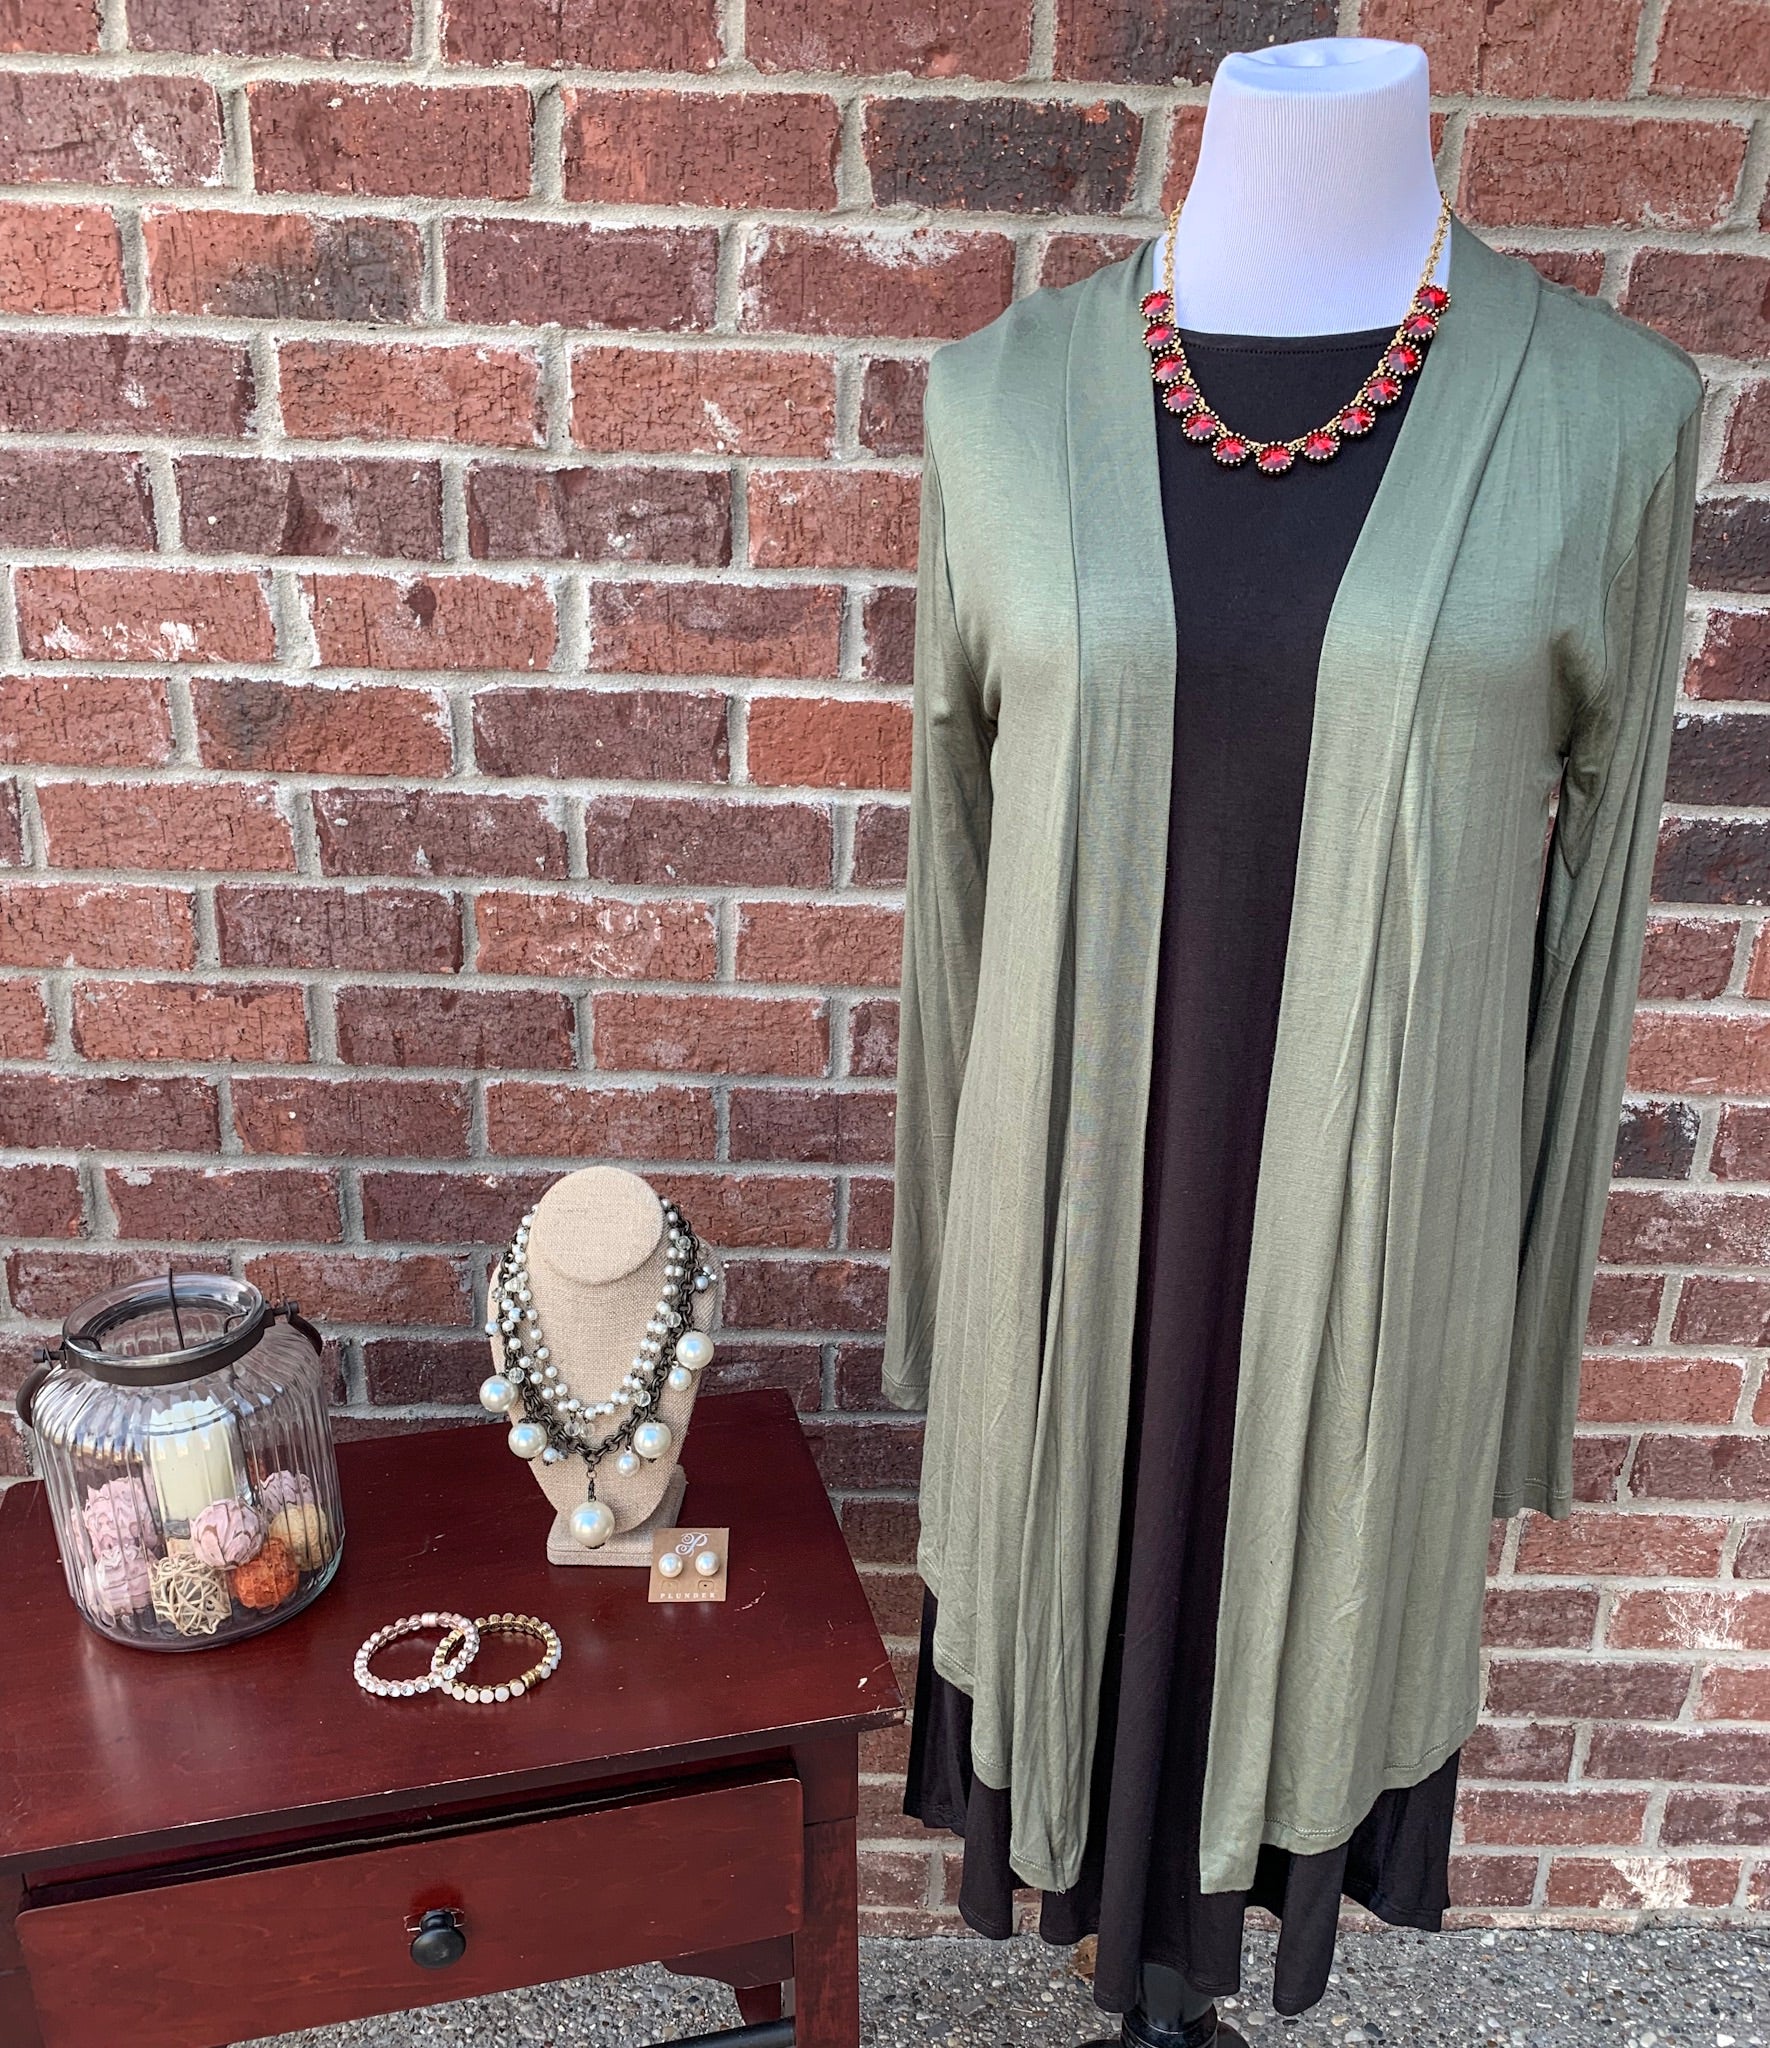 Warmth Delight Light Olive Long Sleeve Cardigan